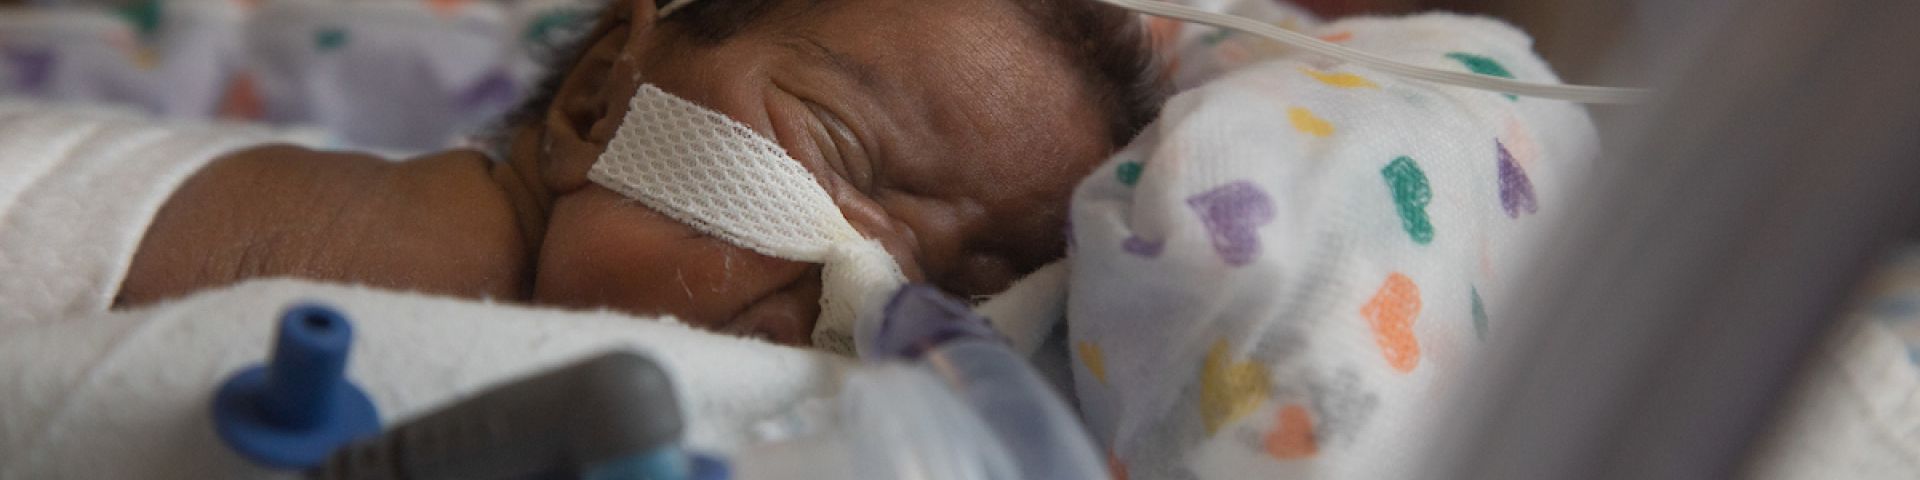 USA Health NICU selected by National Institutes of Health to study effect of antibiotics on preterm infants